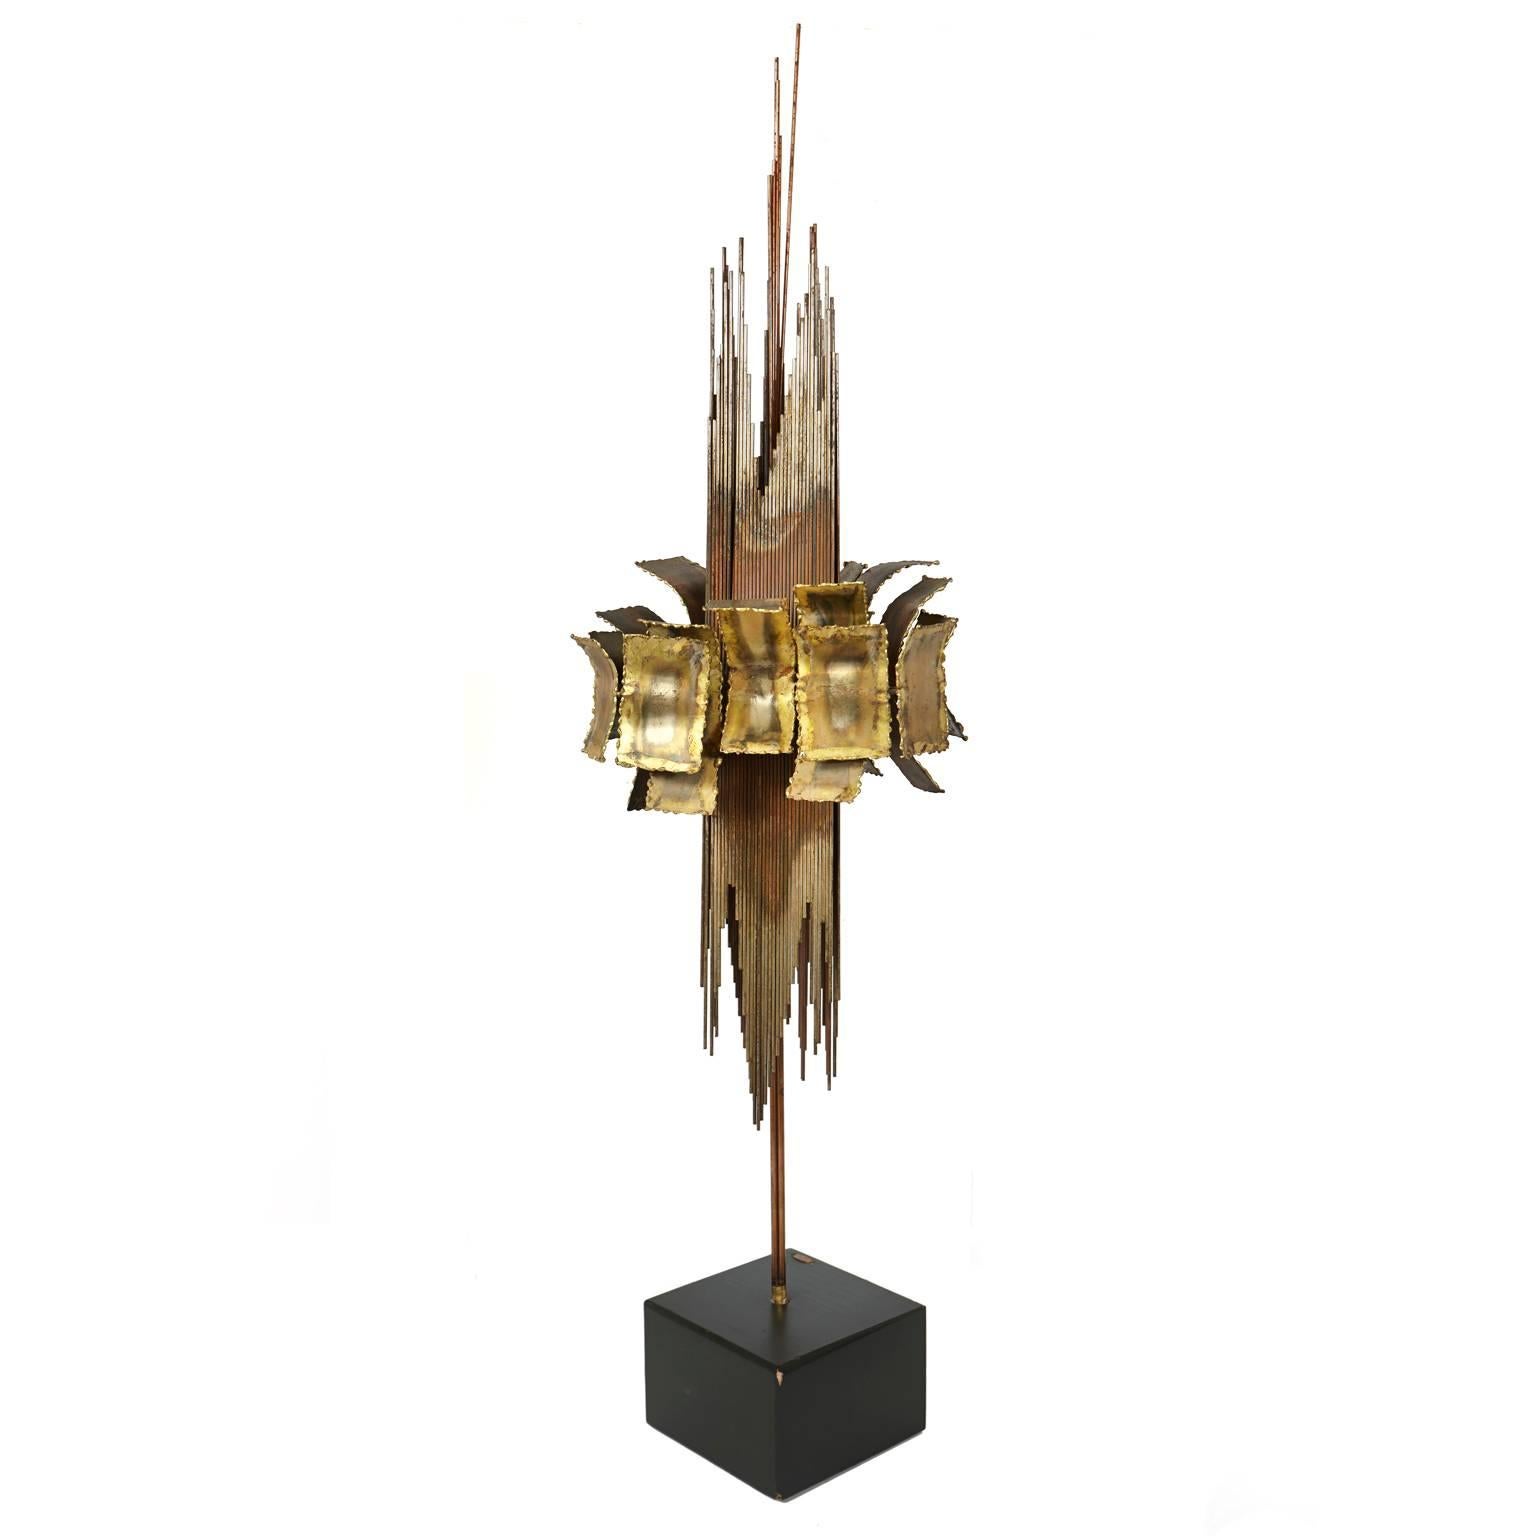 Unique Brutalist brass sculpture by c. Jere signed and dated 1967.
Mounted on blackwood base. Base is 5.5 